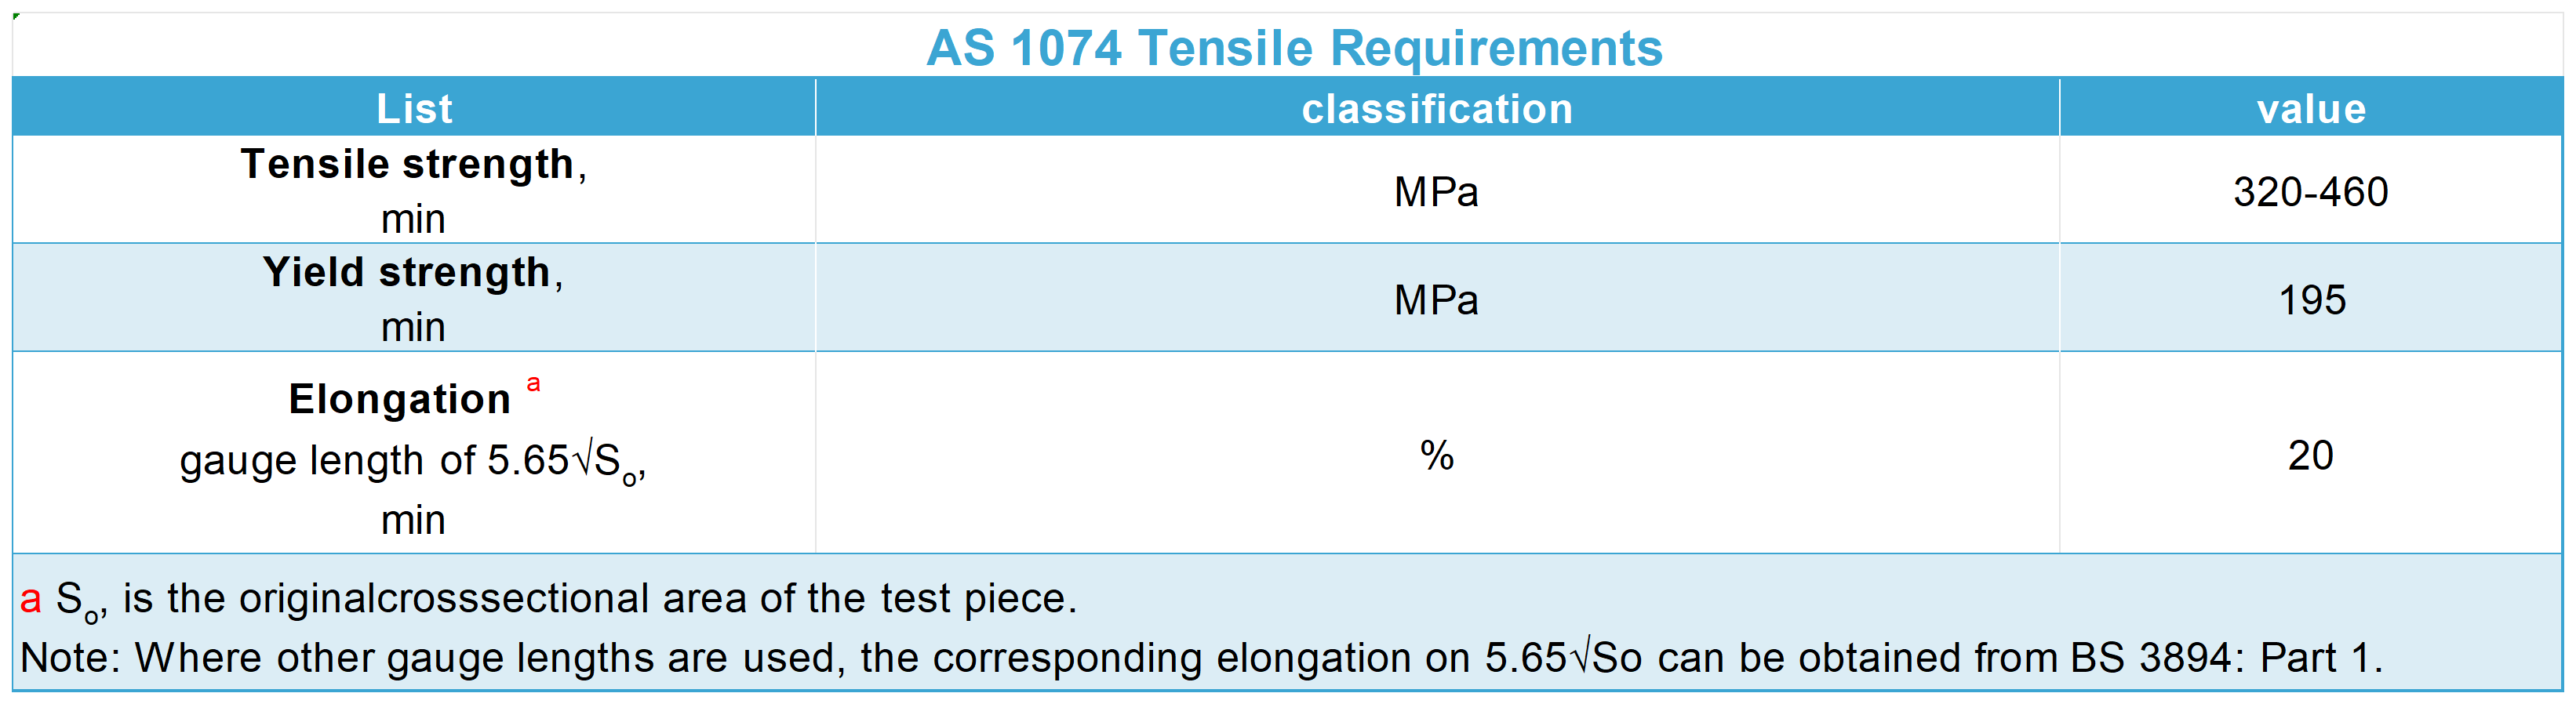 as 1074 Tensile Requirements